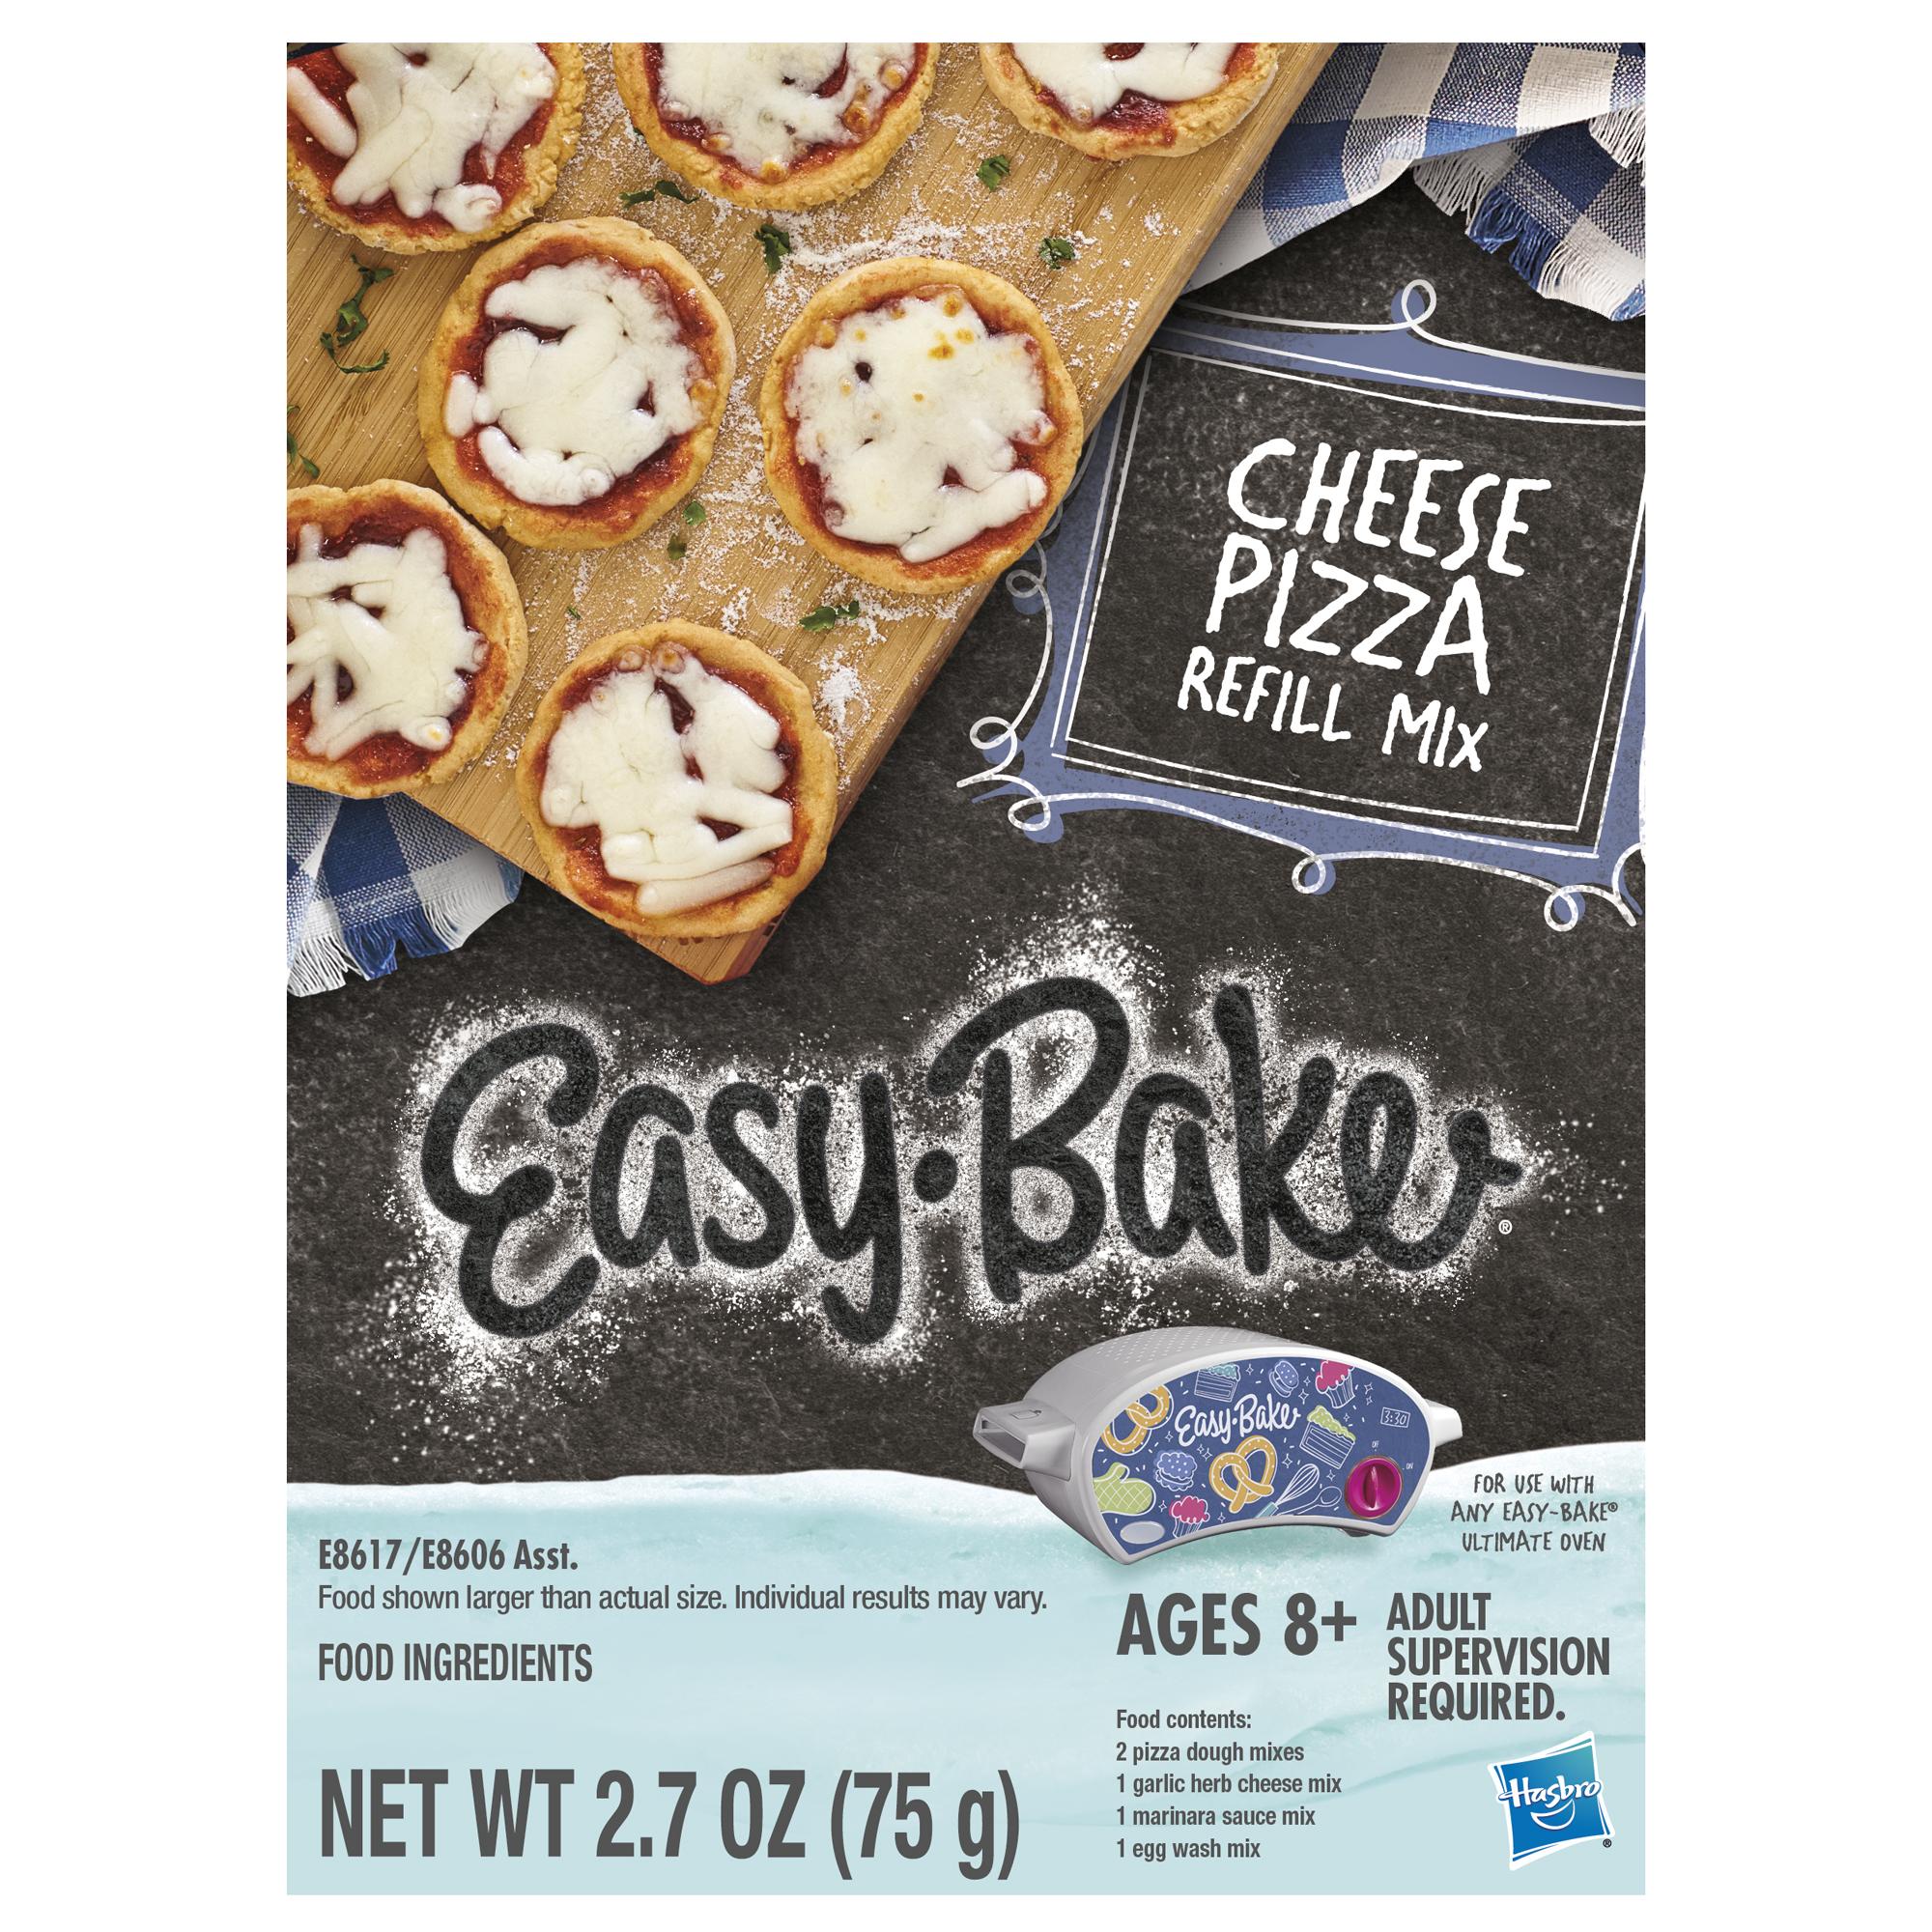 Easy-Bake Ultimate Oven Cheese Pizza Refill Mix 